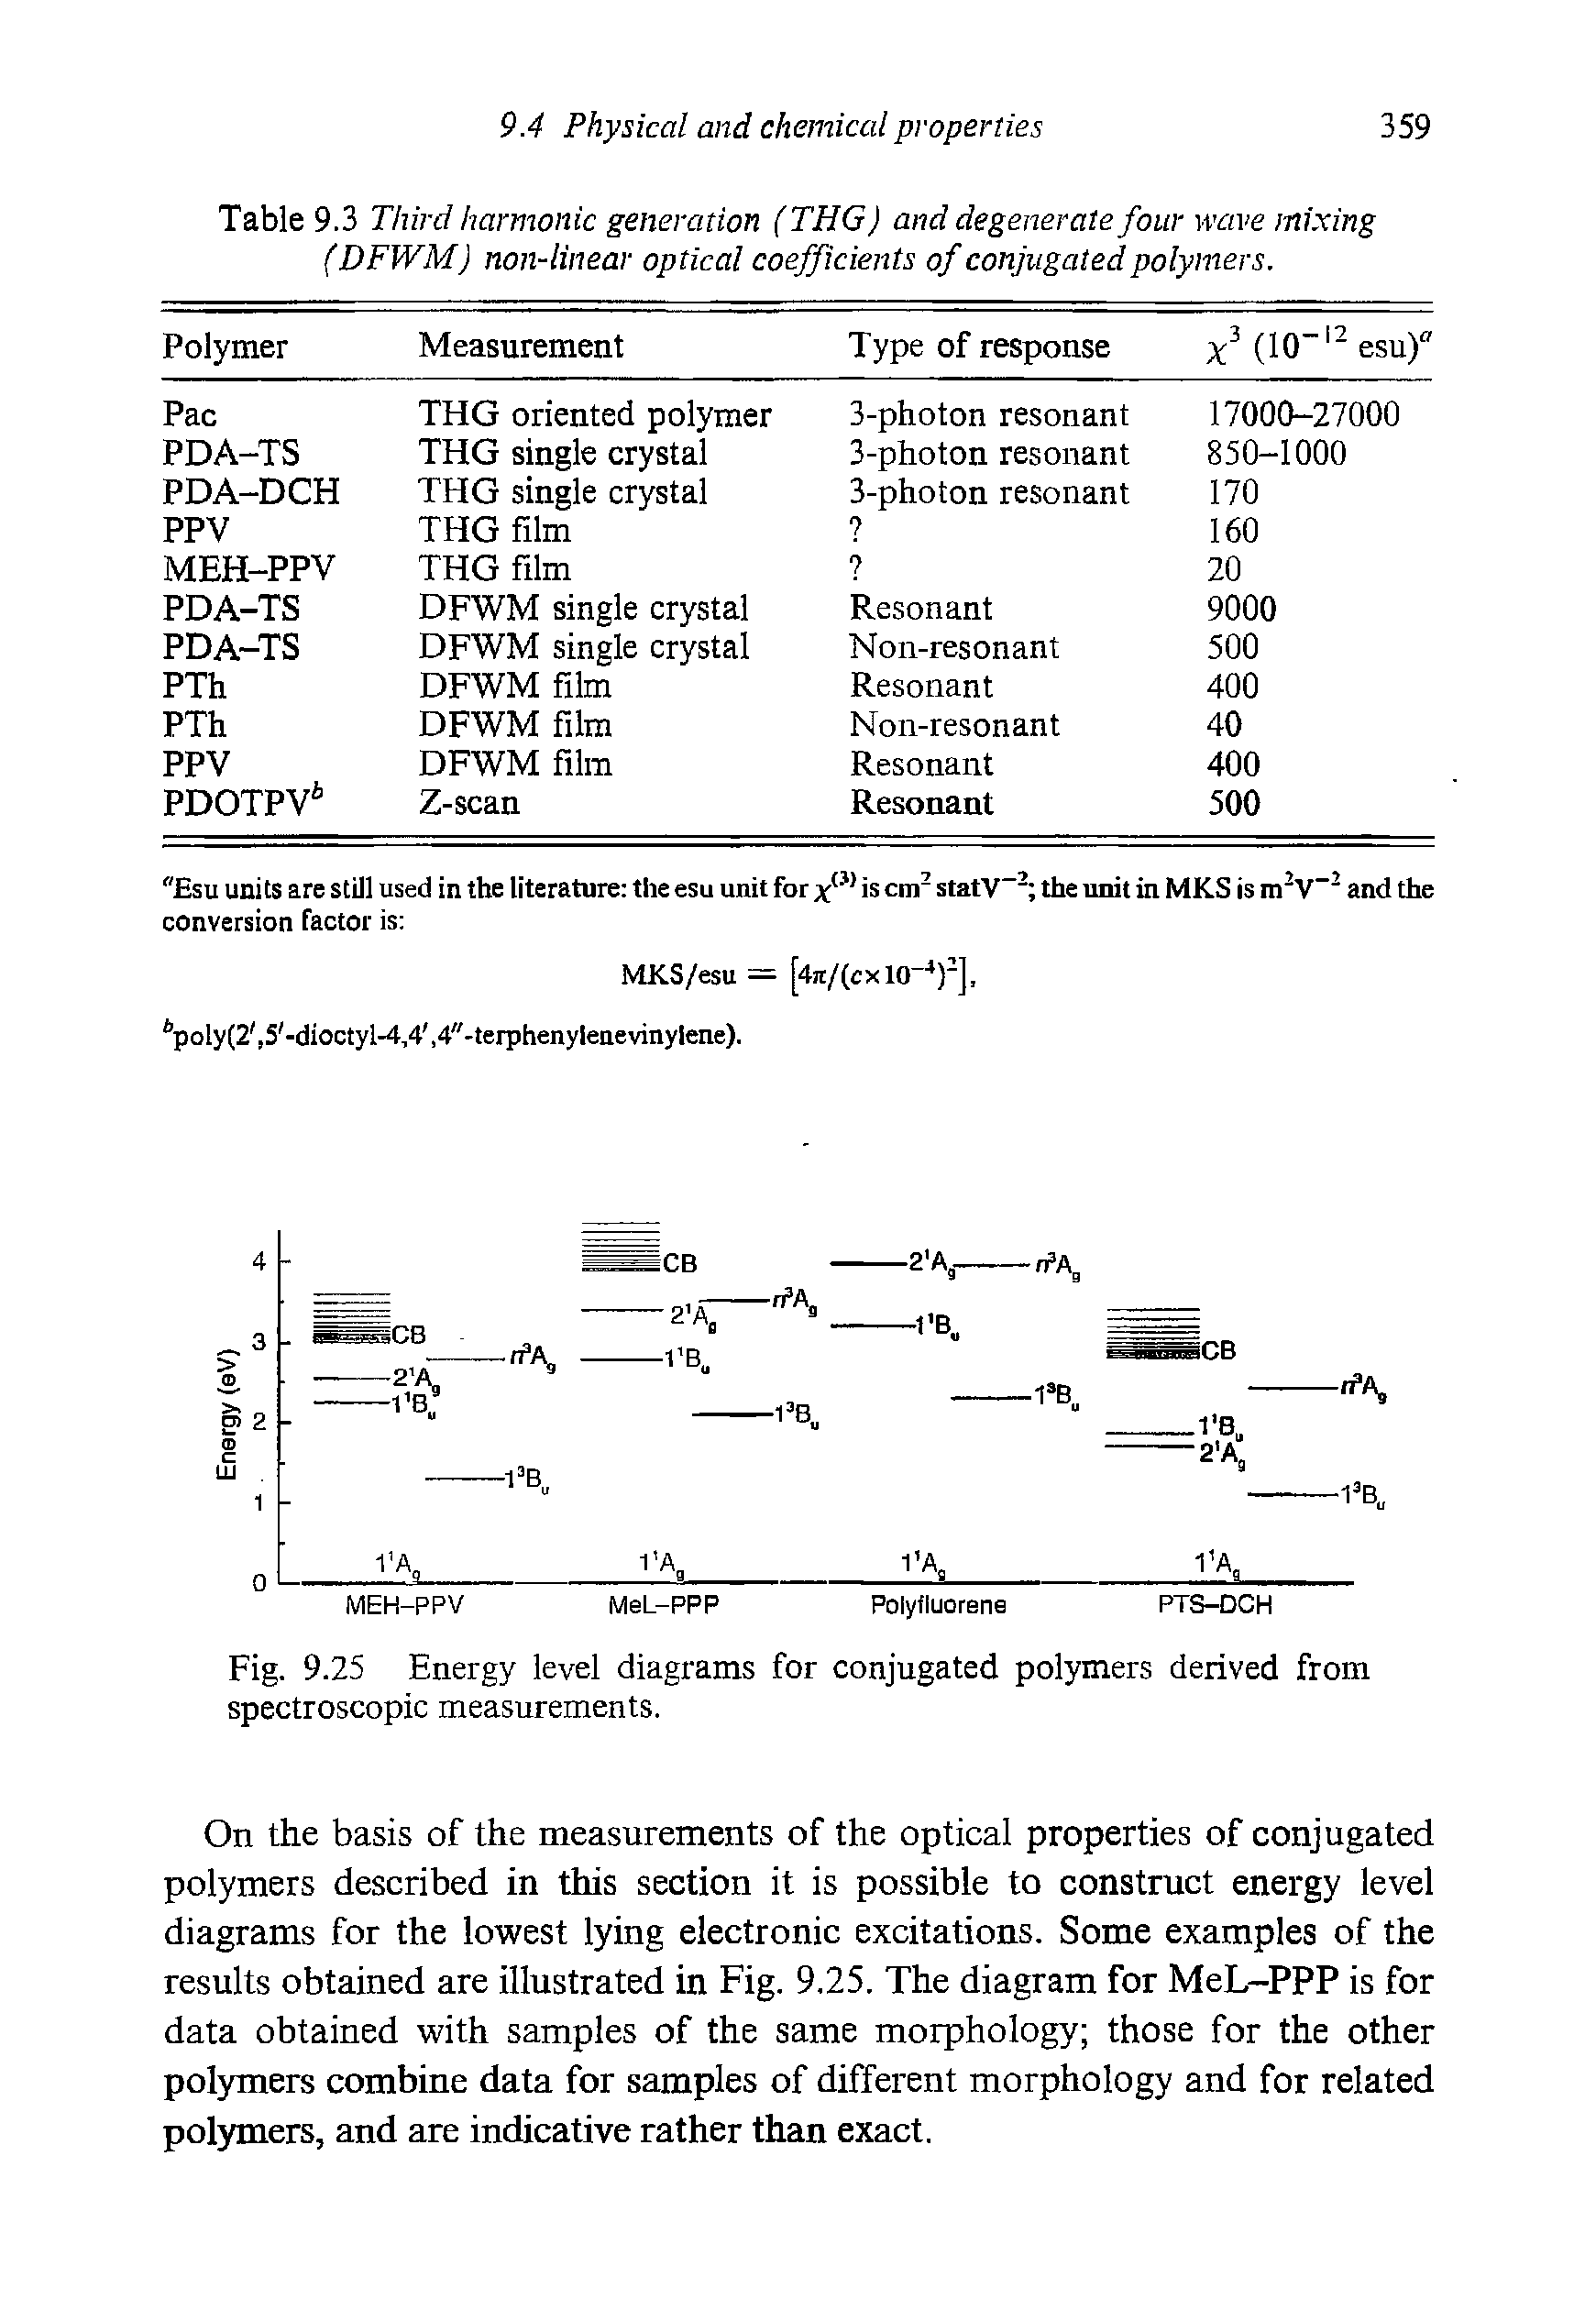 Table 9.3 Third harmonic generation (THG) and degenerate four wave mixing (DFWM) non-linear optical coefficients of conjugated polymers.